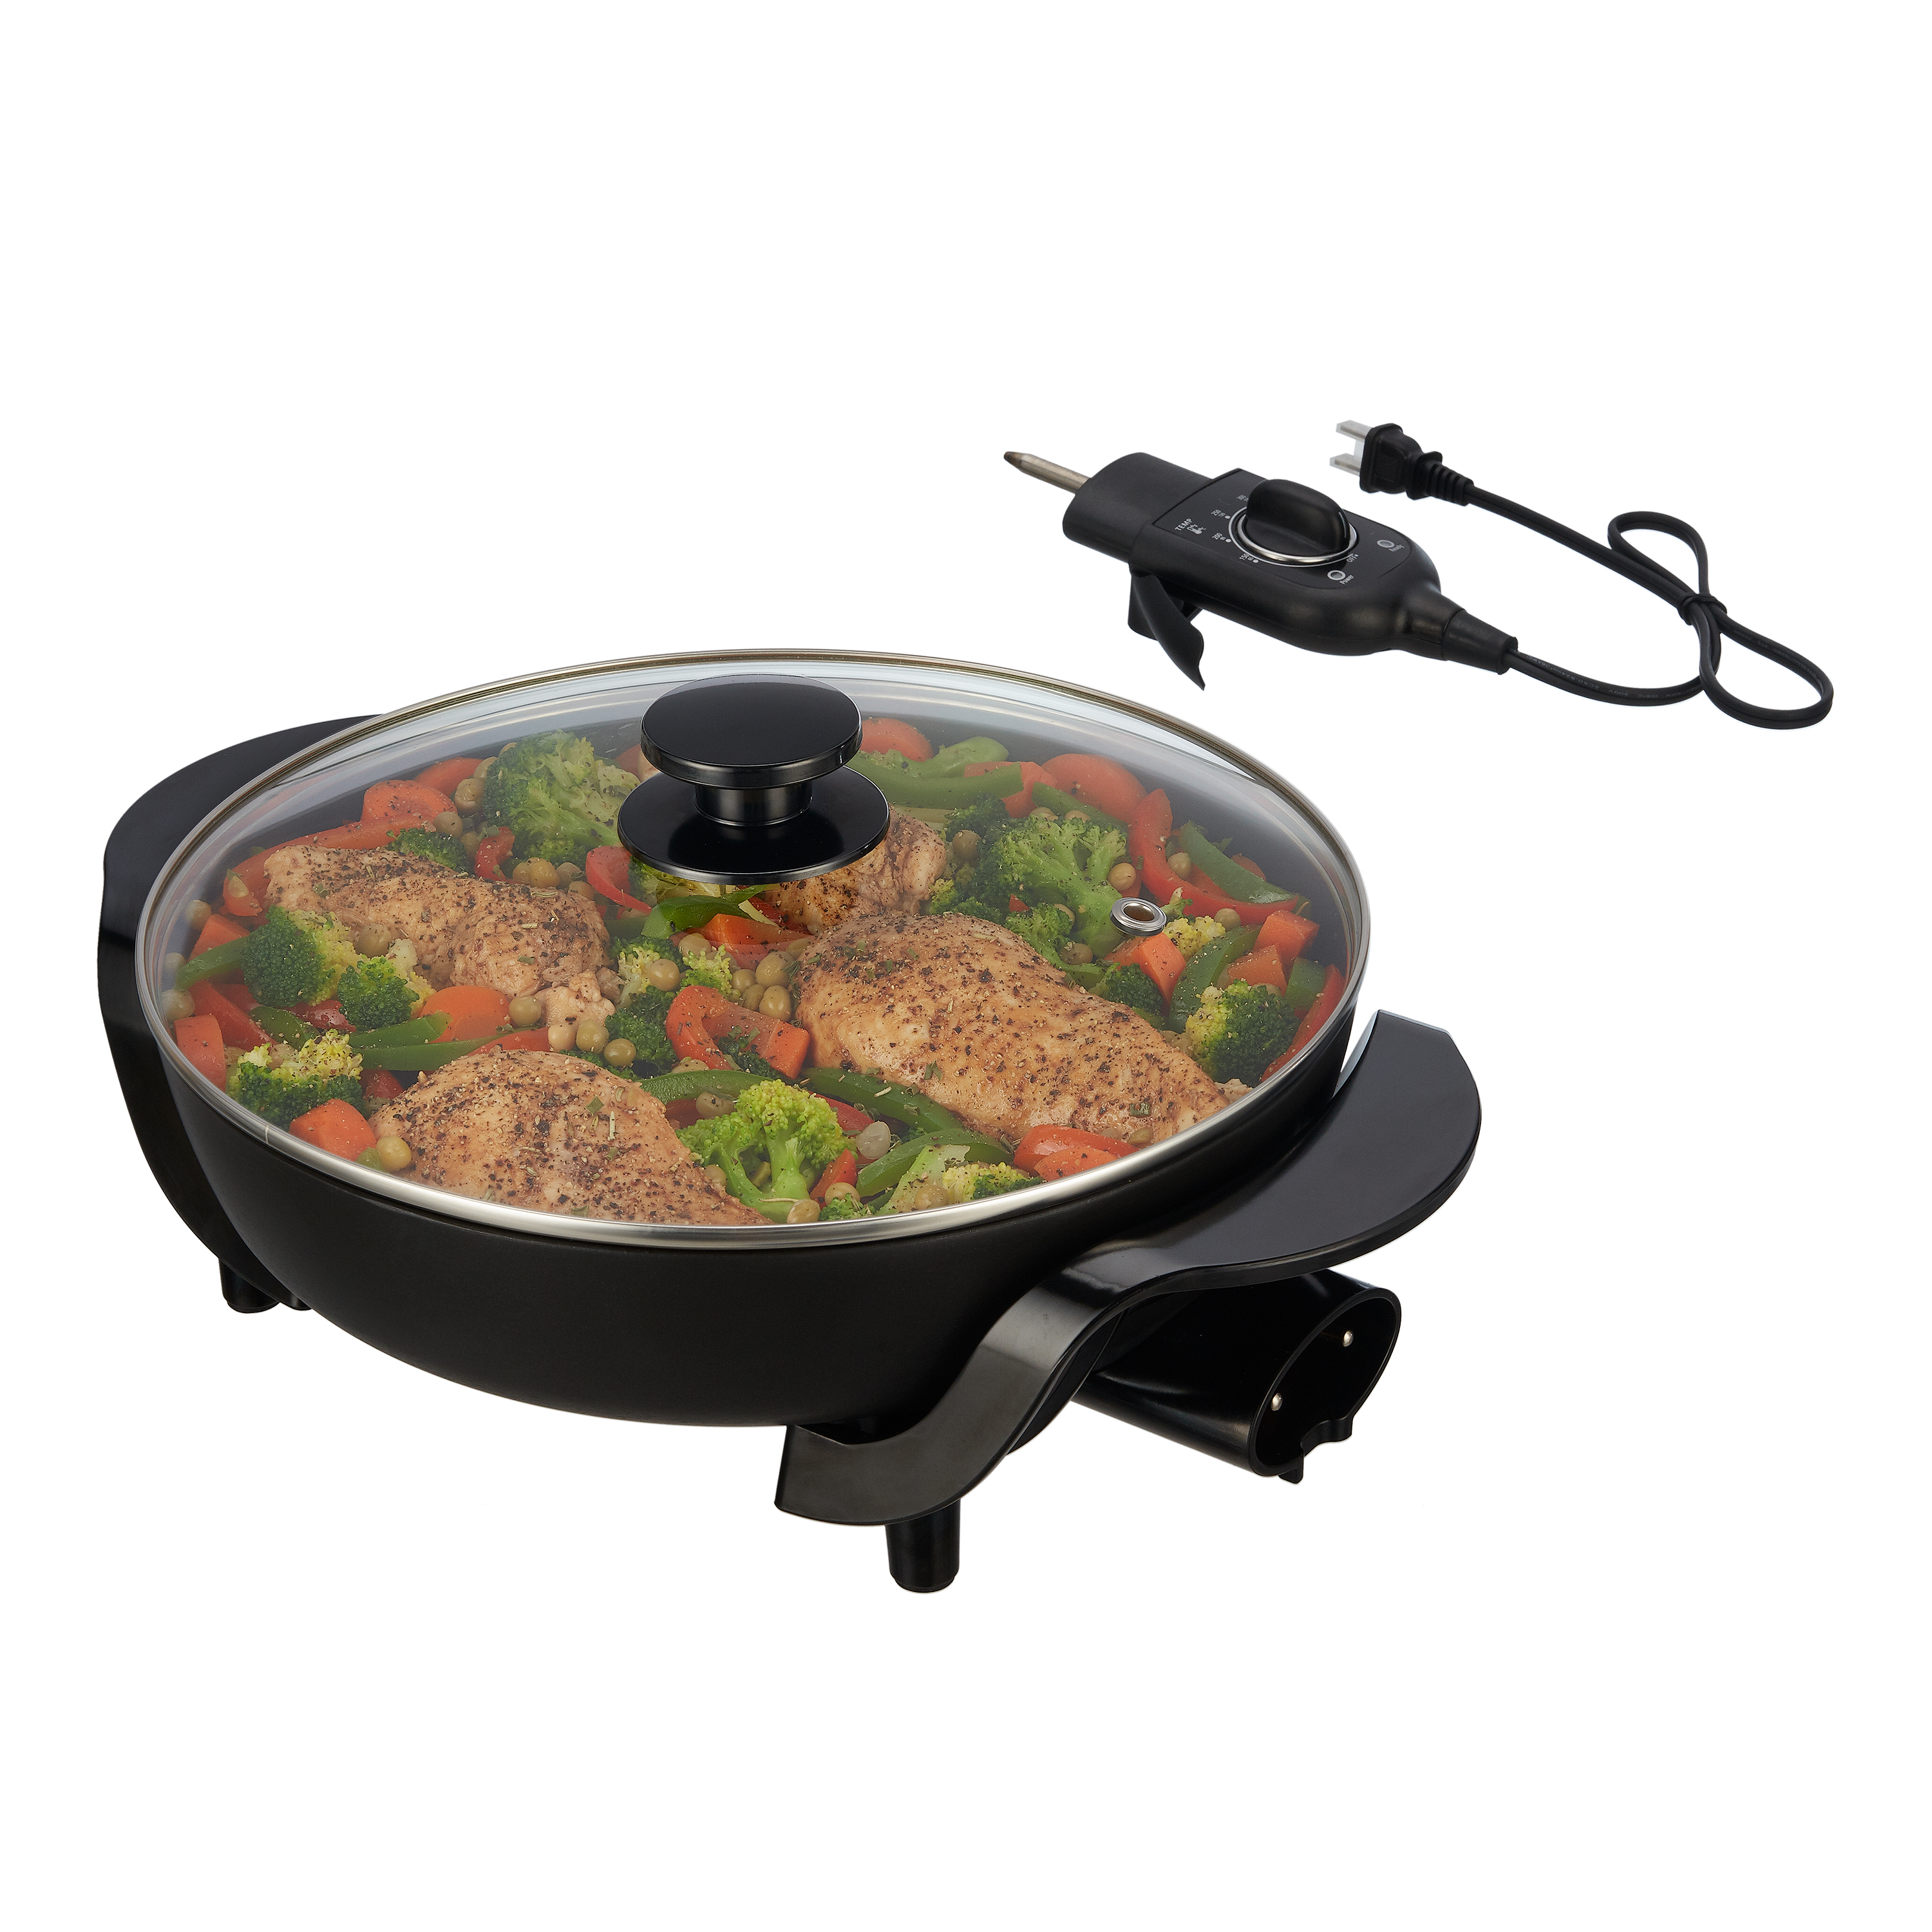 Mainstays 12" Round Nonstick Electric Skillet with Glass Cover, Black - image 3 of 6